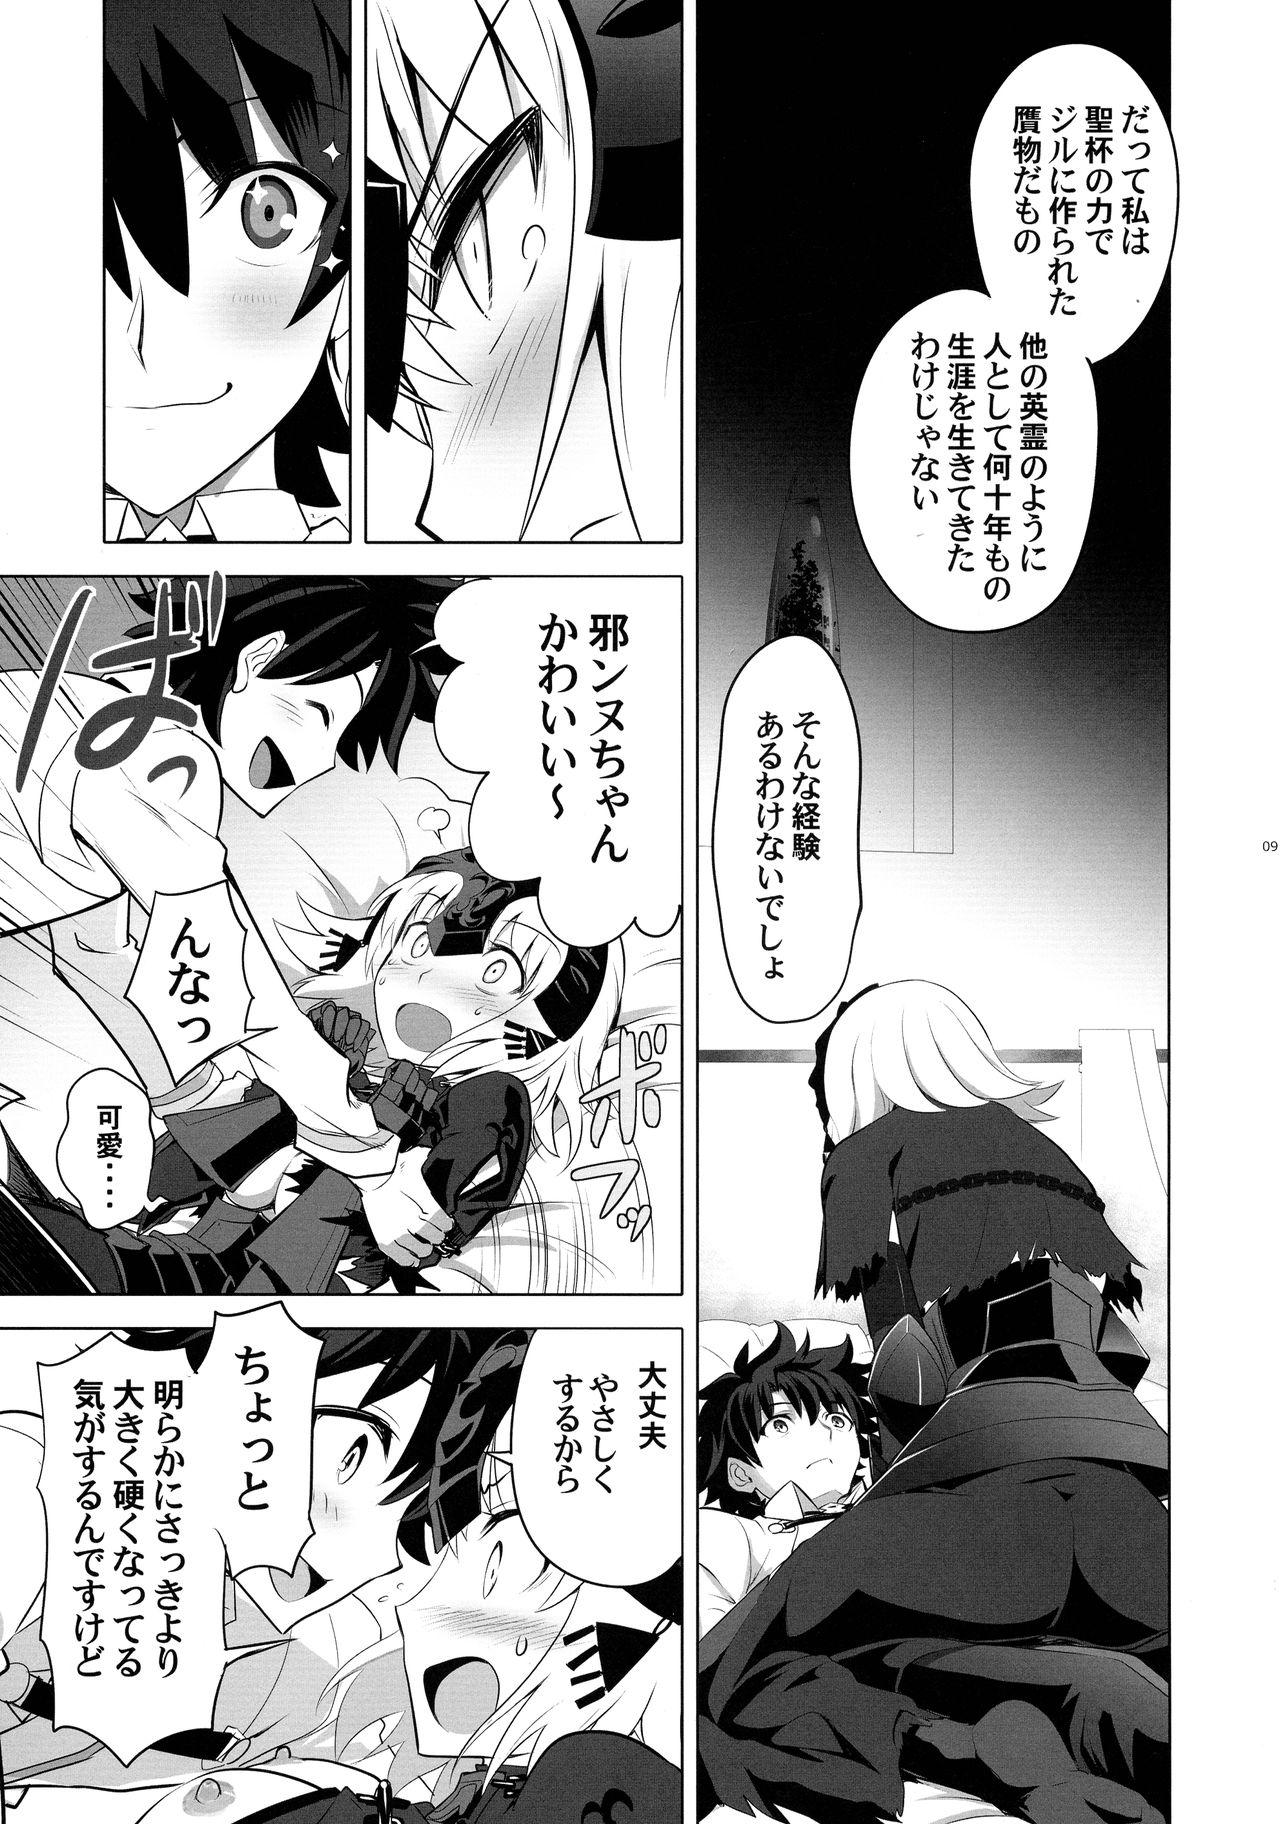 Innocent T*MOON COMPLEX R18 Soushuuhen - Fate grand order Leather - Page 9